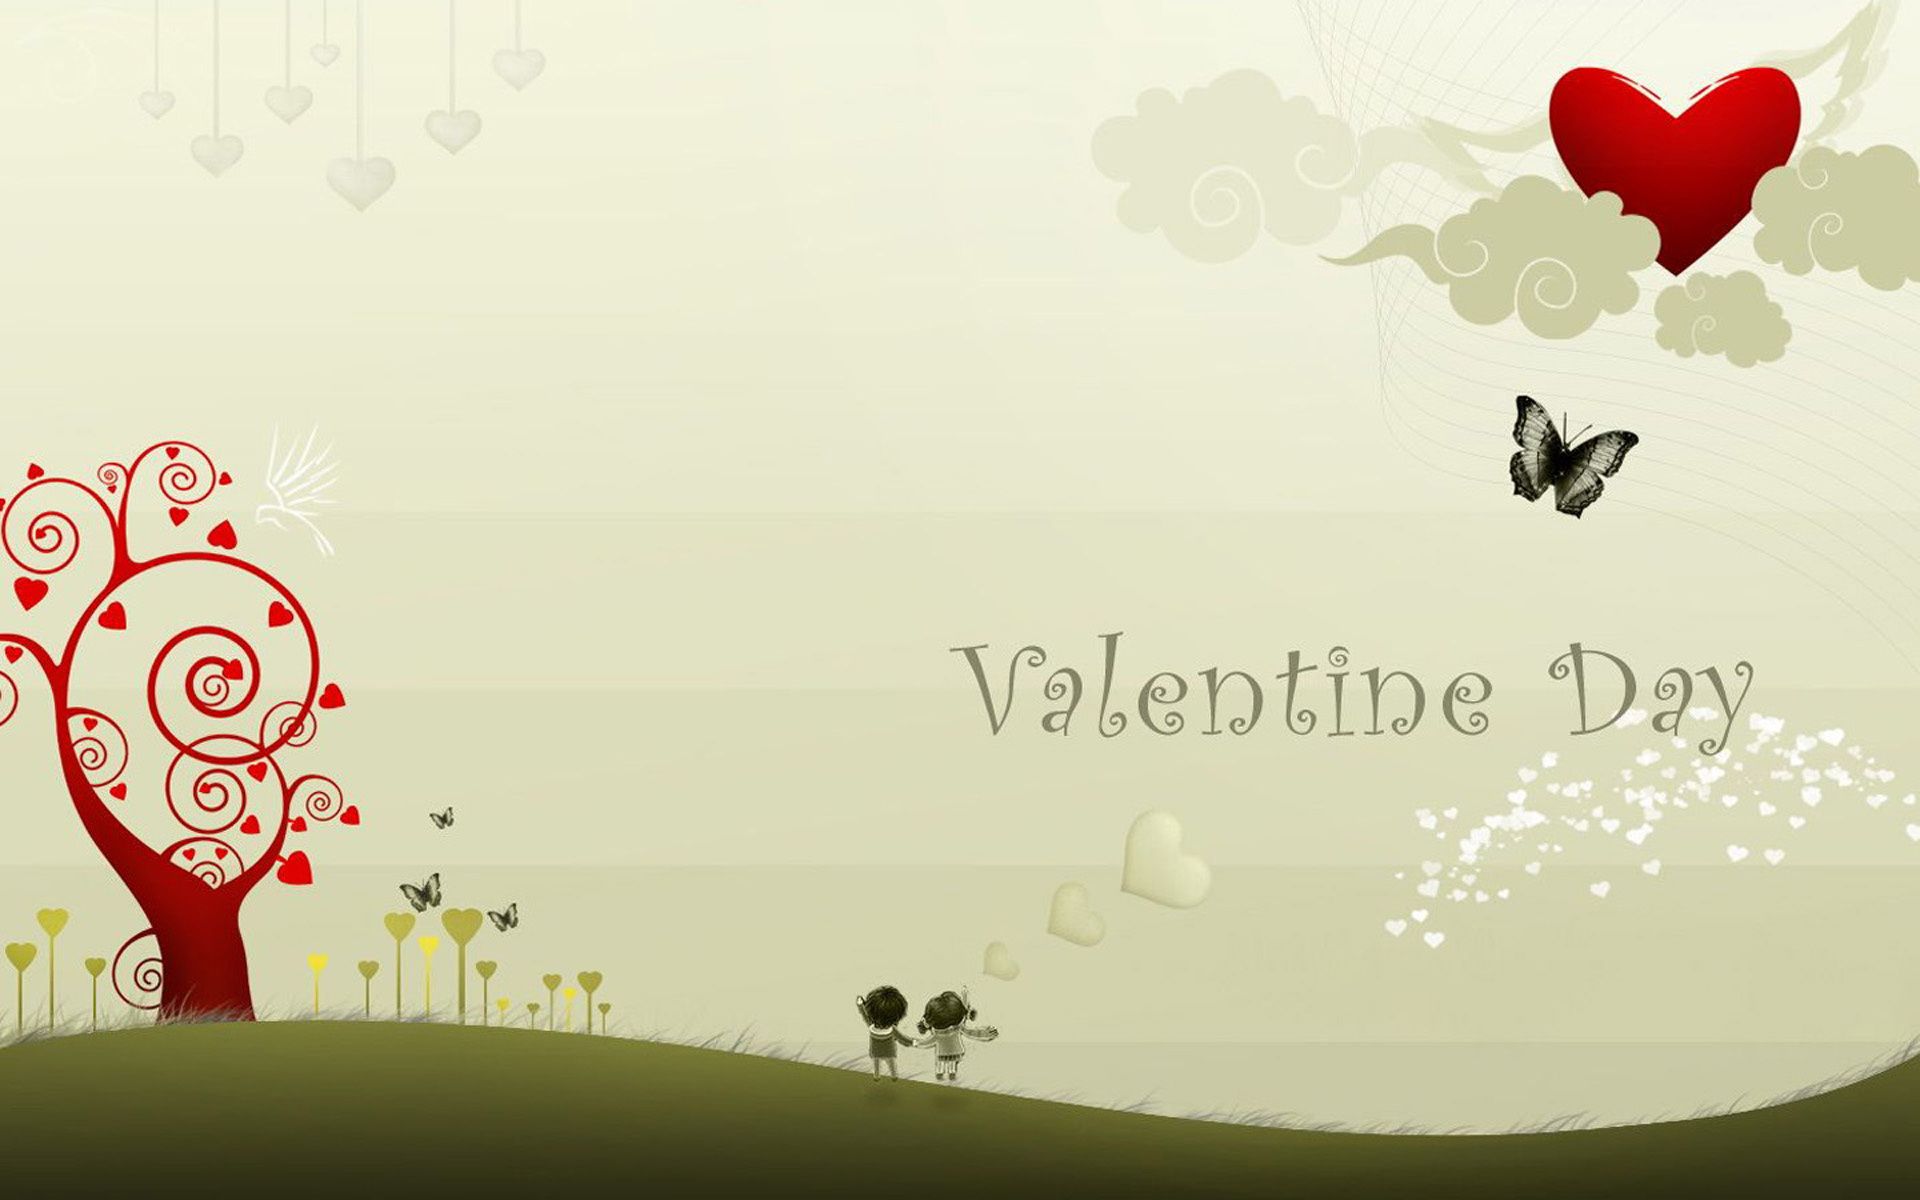 Wallpaper picture, couple, tree, heart, butterfly, love, valentines day desktop wallpaper Holidays GoodWP.com